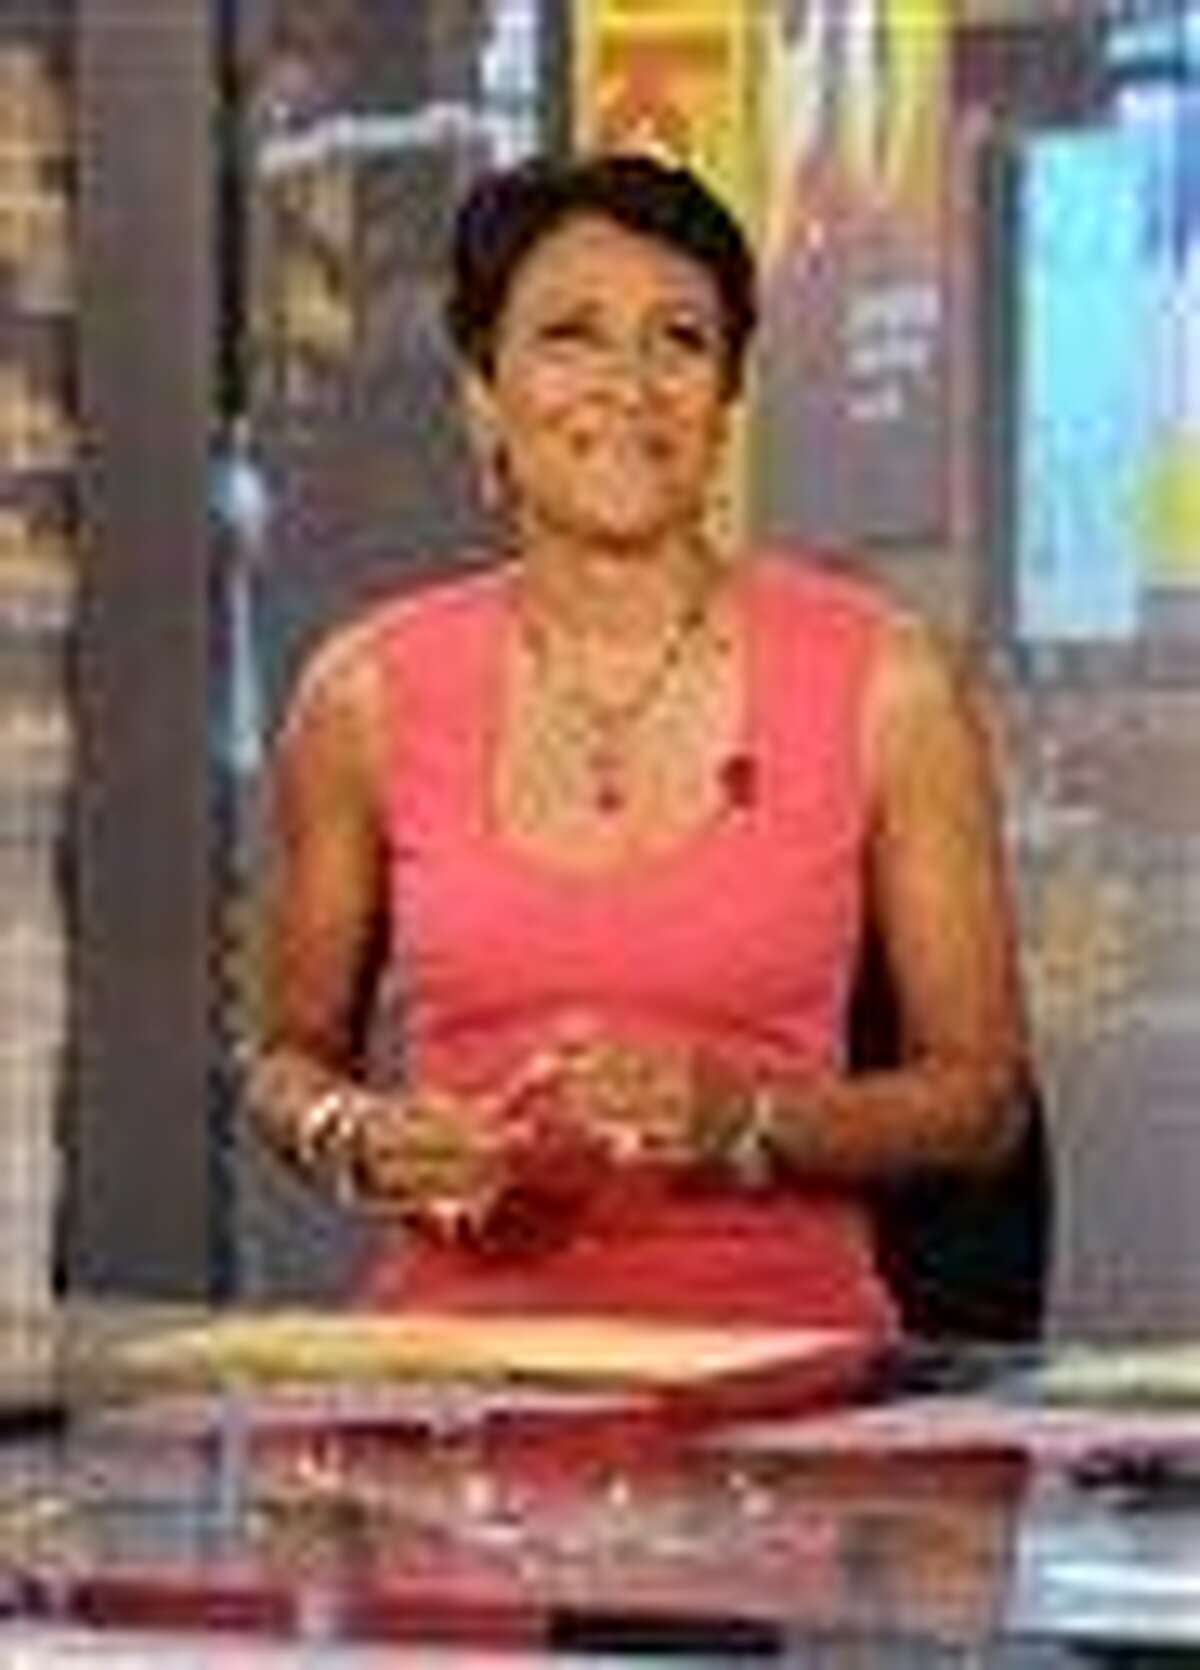 On Monday's edition of Good Morning America, Robin Roberts made official the start date for what's being called her "extended medical leave." Associated Press photo